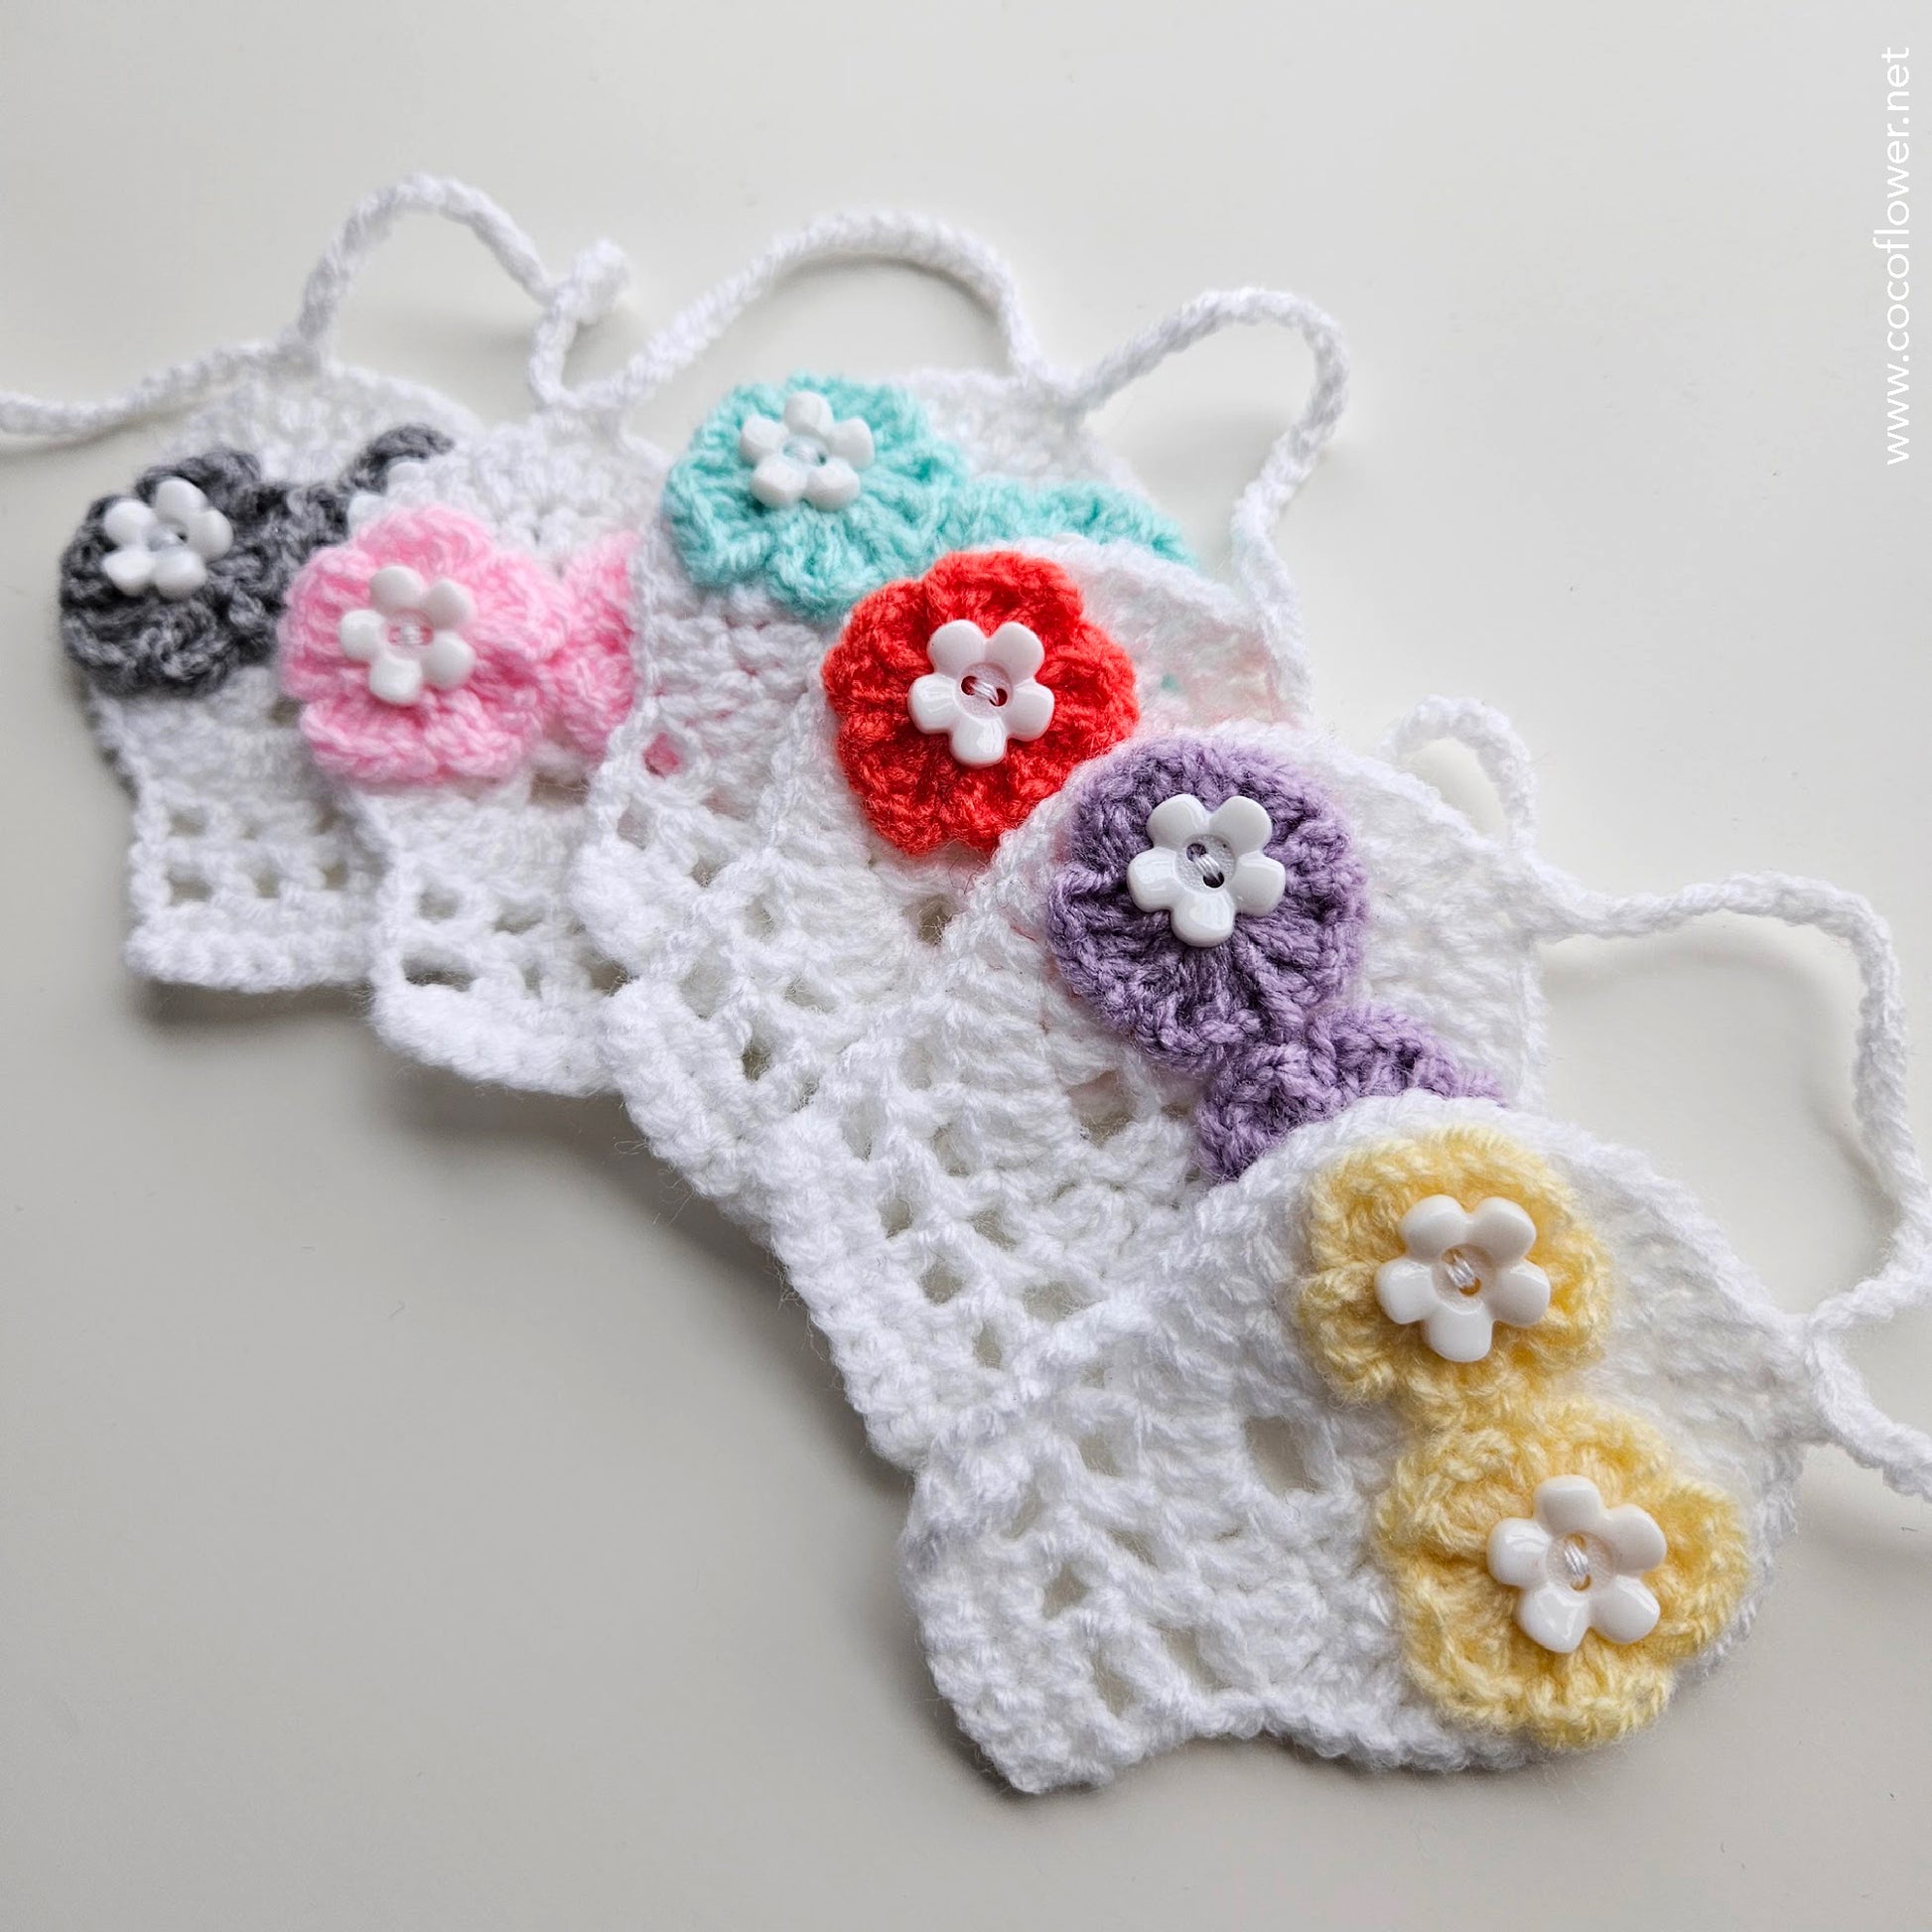 Embrace the darker aesthetic with our Sugar Skull Garland, a perfect blend of crochet artistry and alternative style.